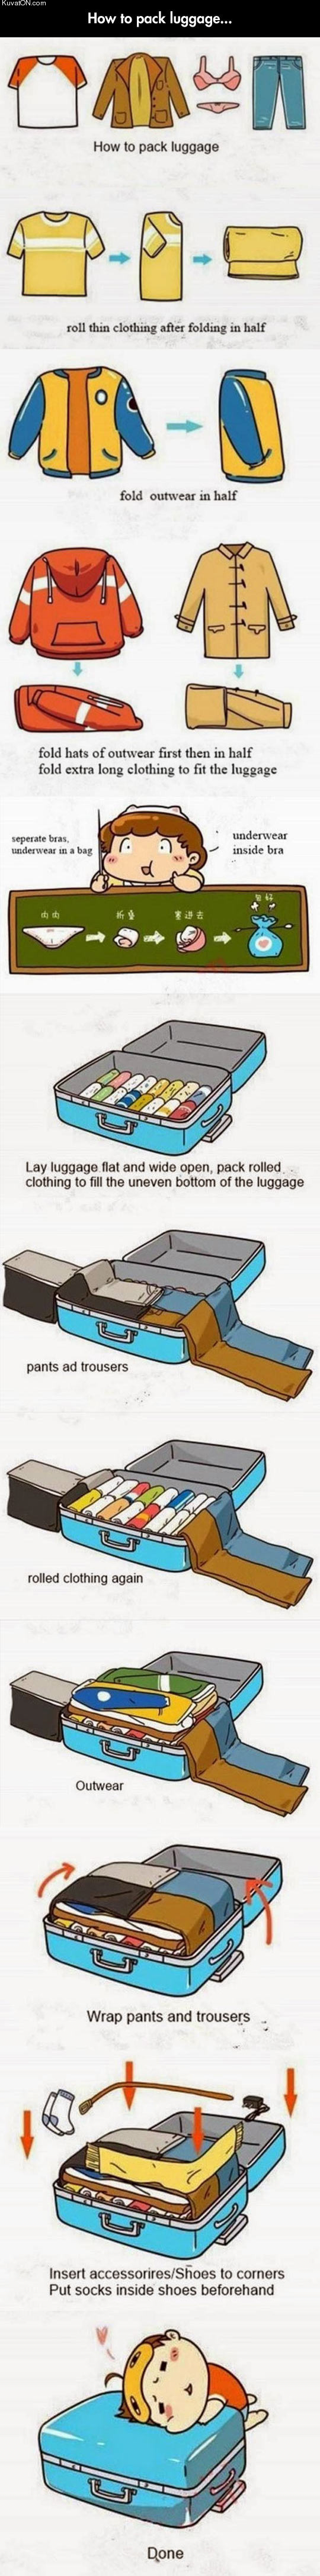 how_to_pack_luggage.jpg